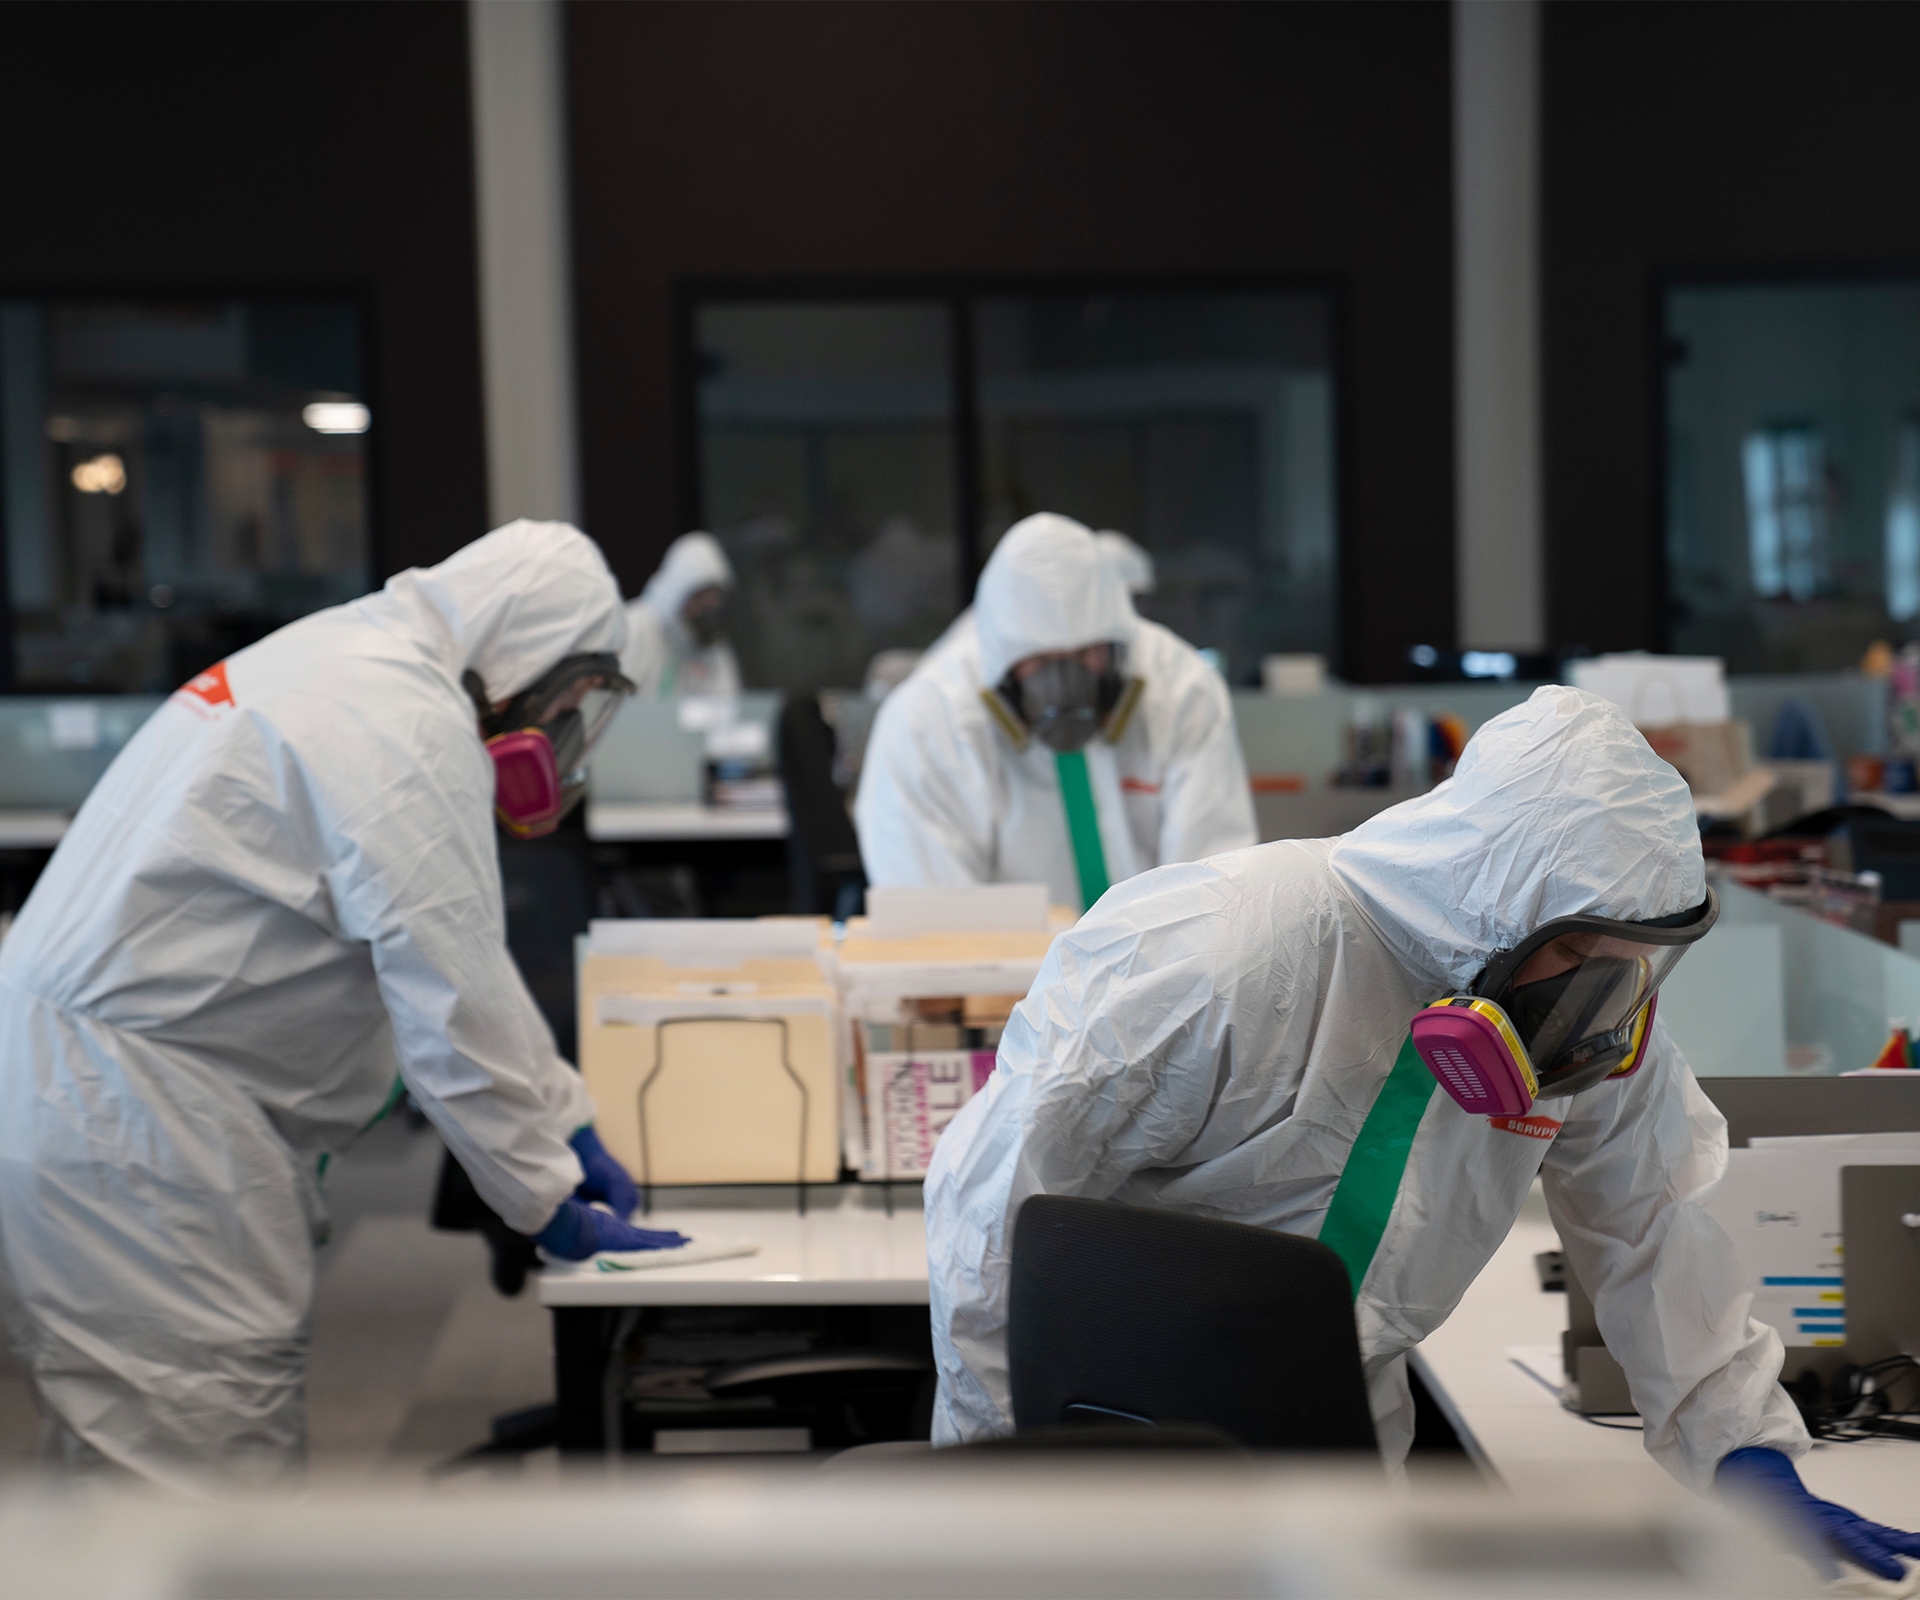 Workers in hazmat suits cleaning desks in commercial office space